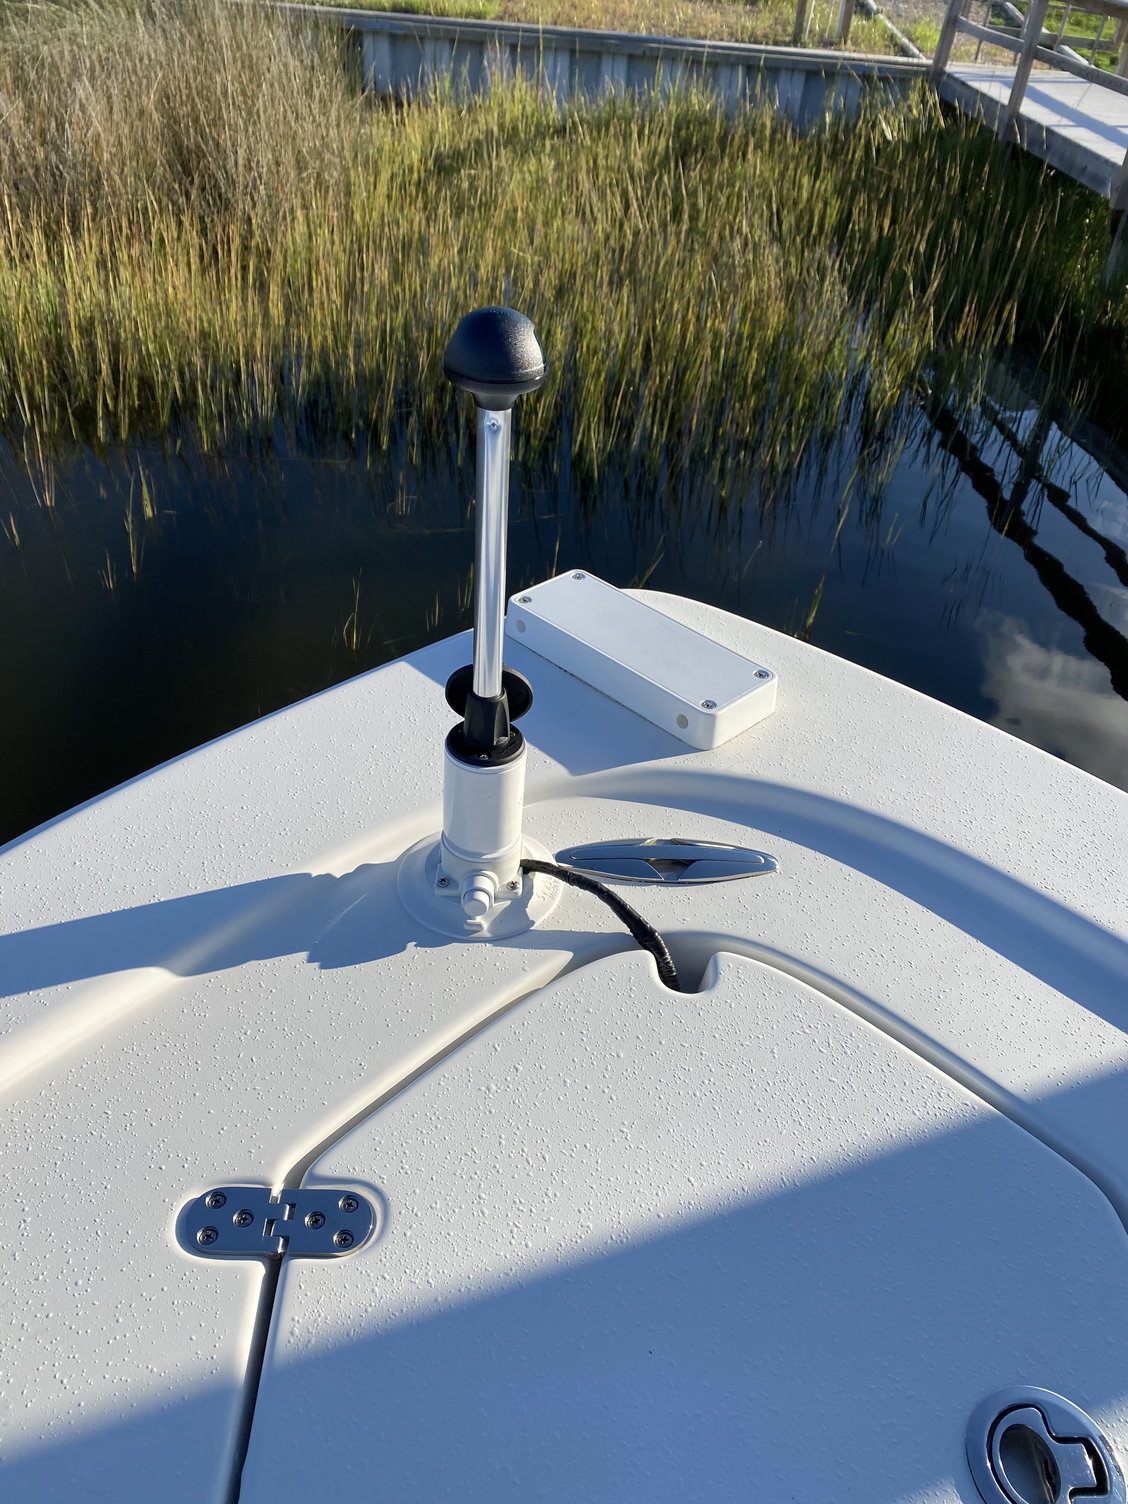 Cabin Rod Holder Suggestions? - The Hull Truth - Boating and